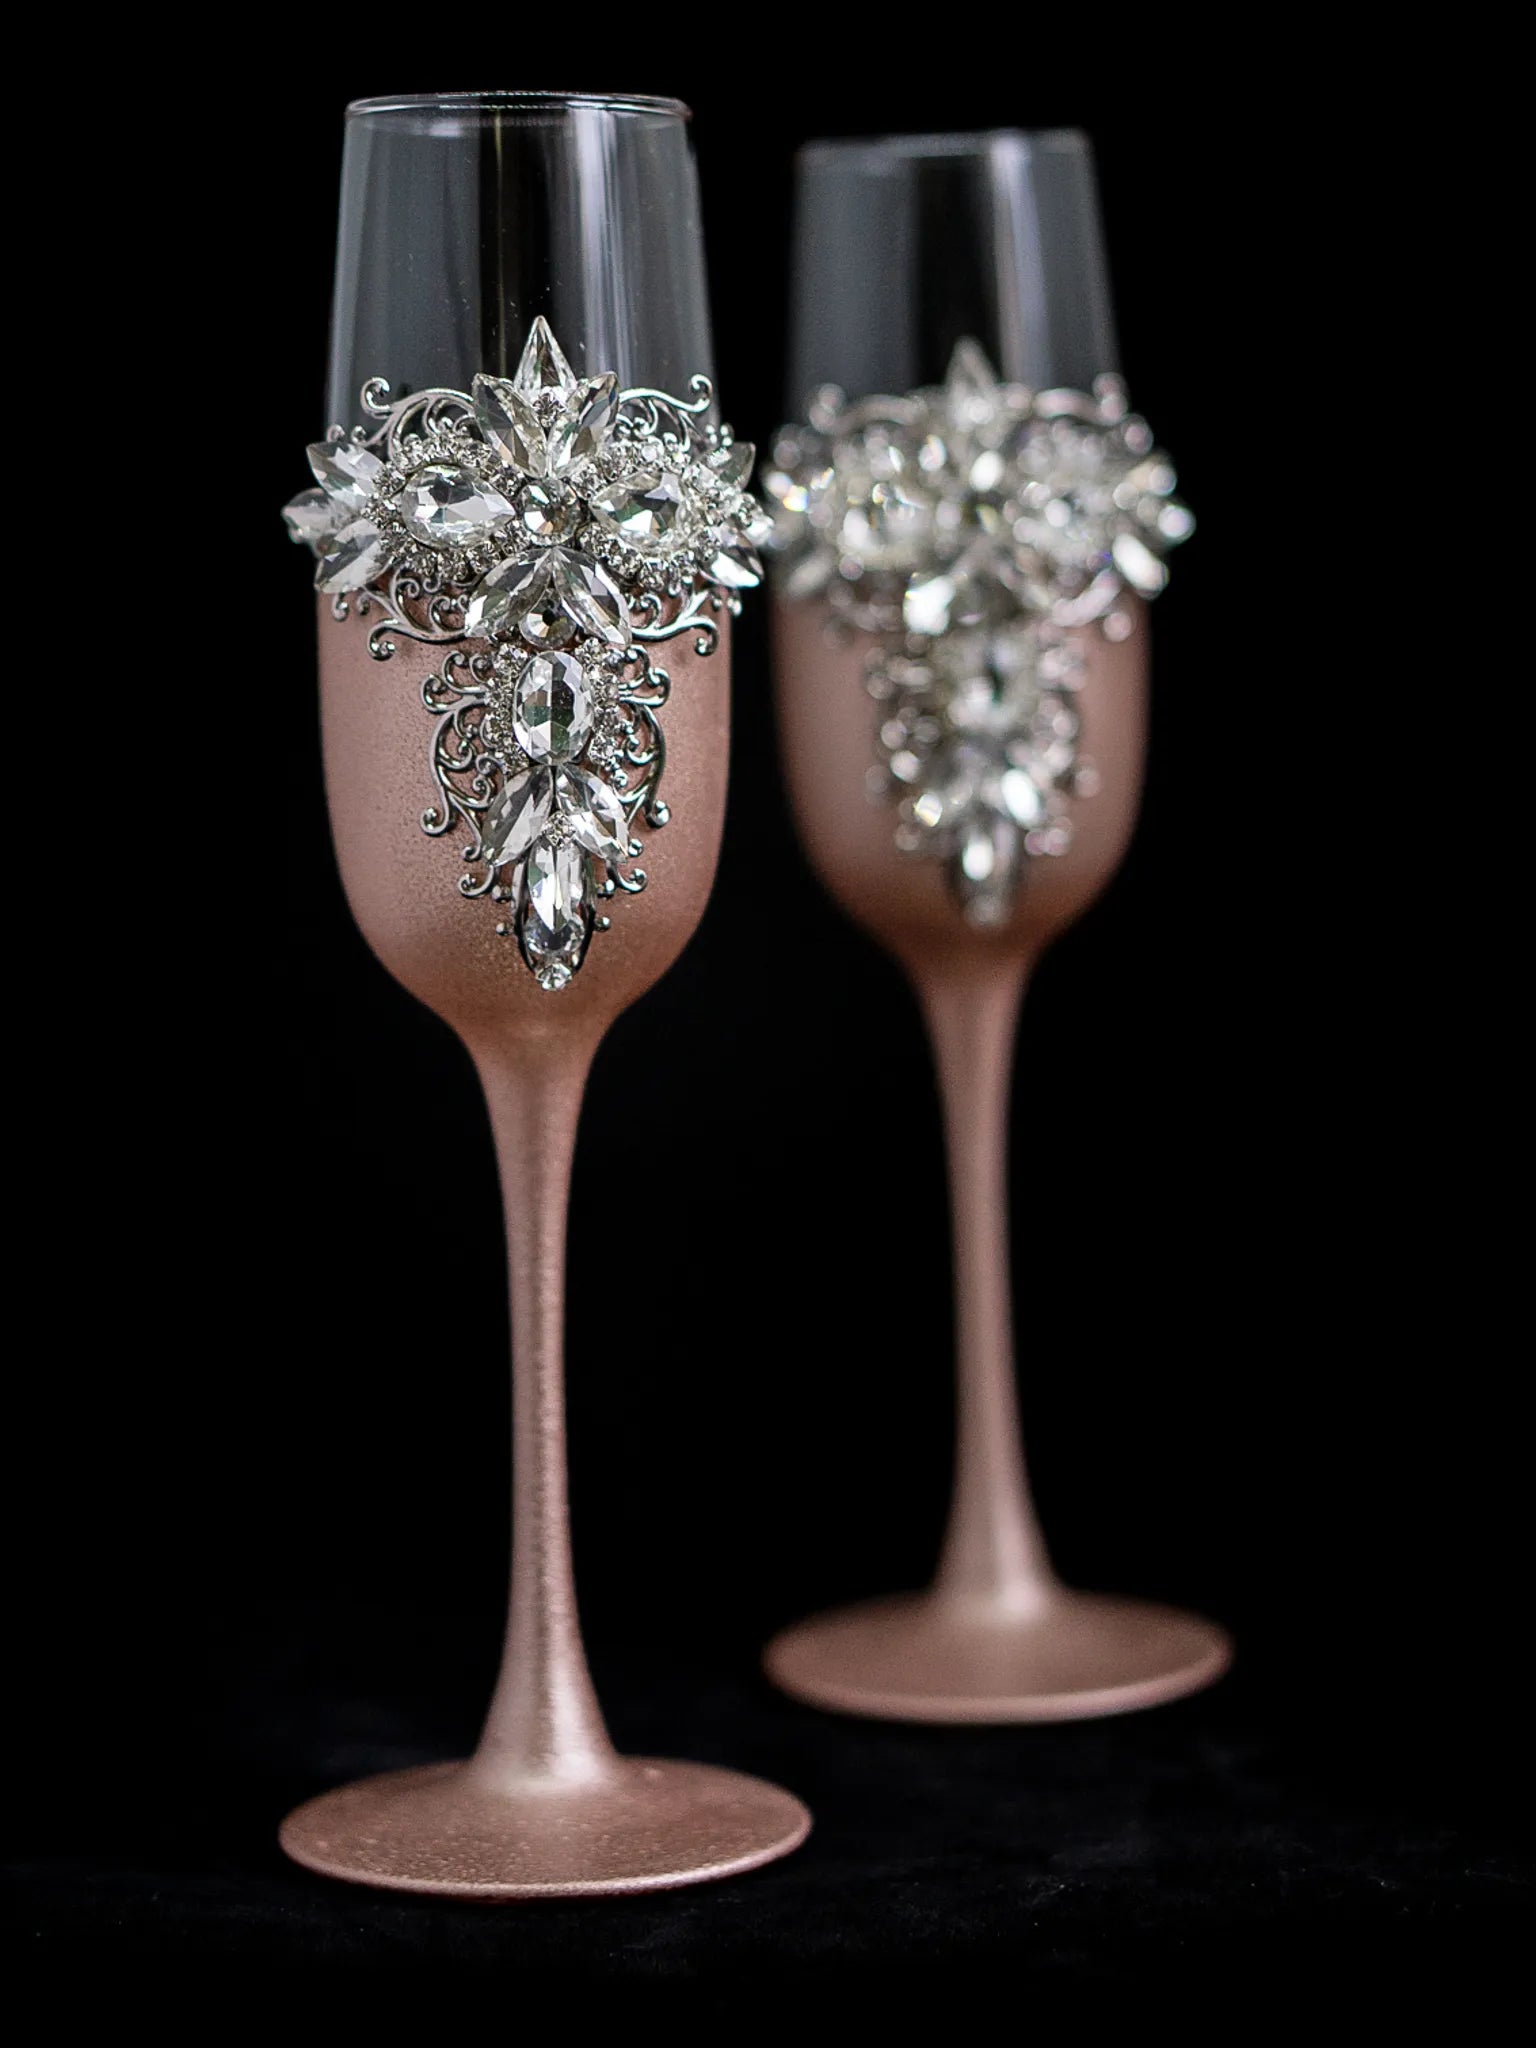 Unique personalized wedding flutes in rose gold